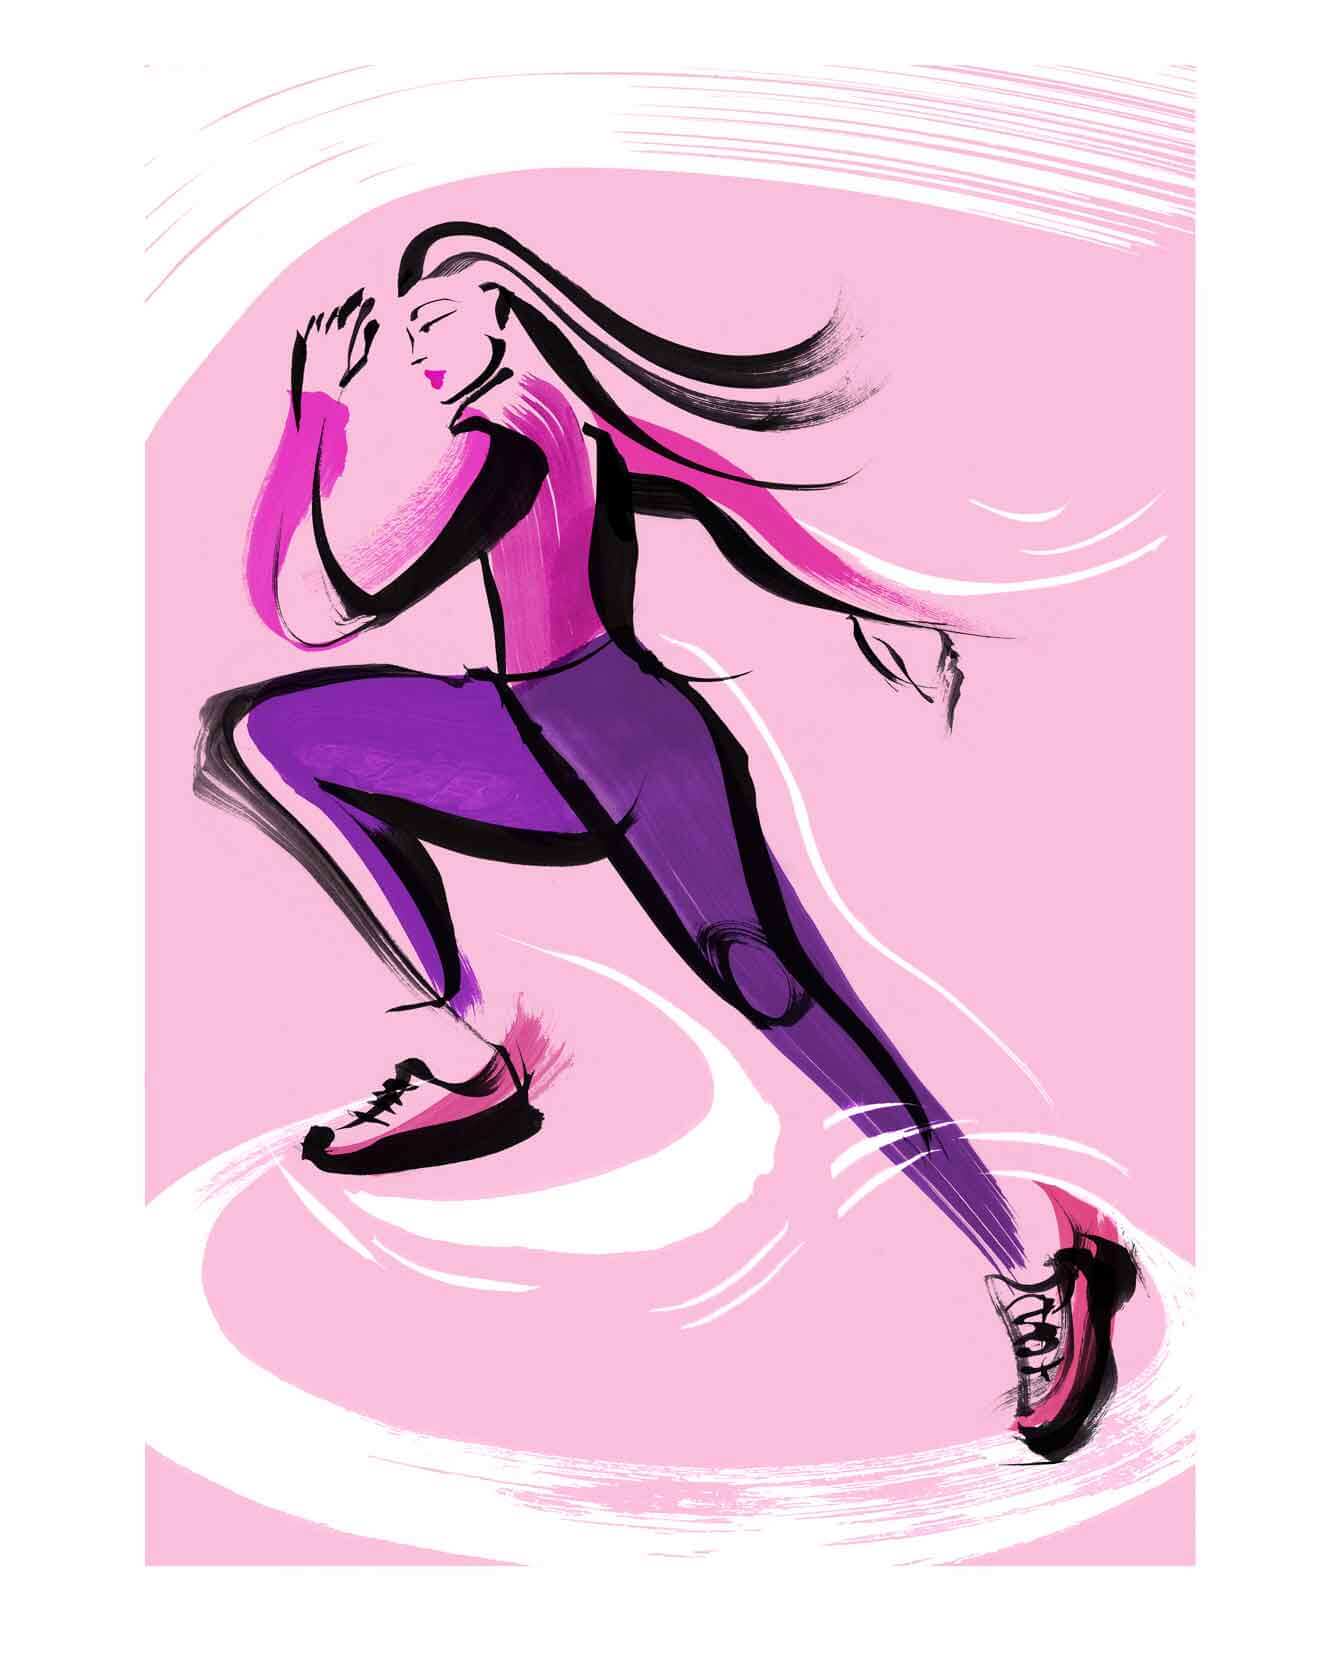 Energetic ink brush stroke illustrations of women athletes. Pink tones and white mark making. A woman leaping. Sports inspired illustration.